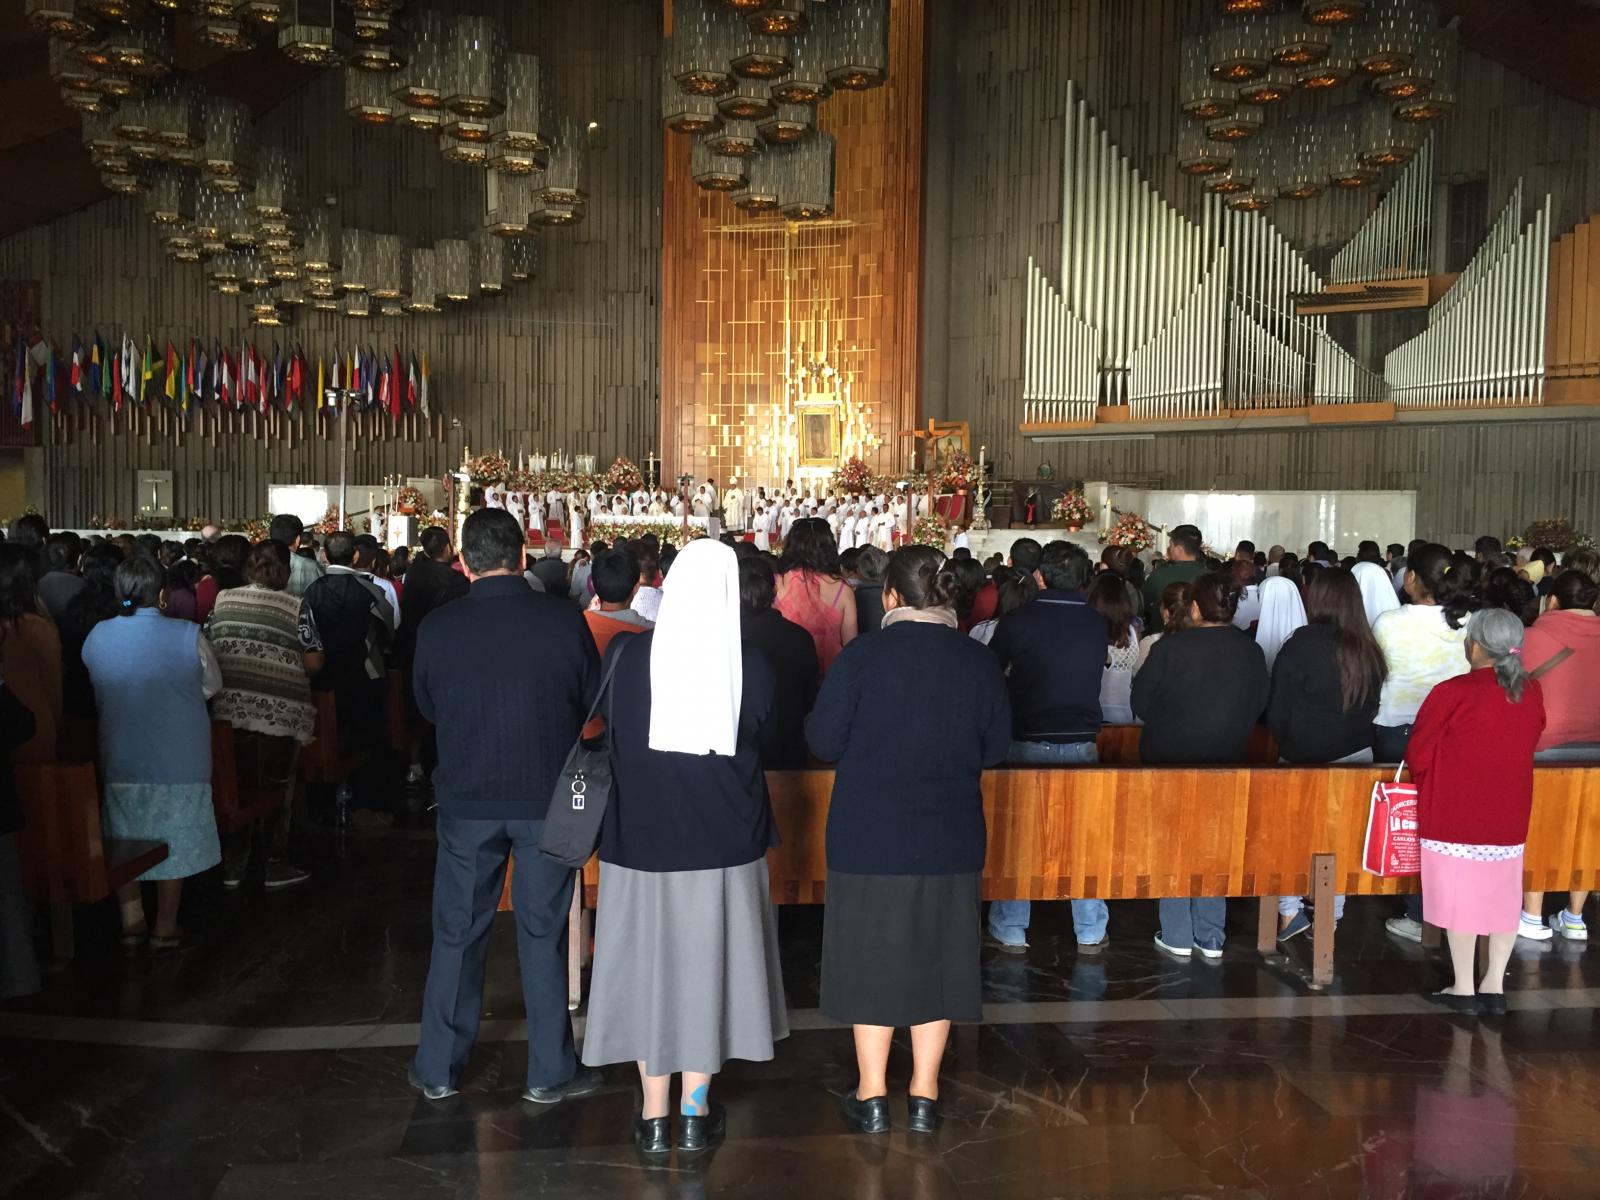 Mass at Our Lady of Guadalupe